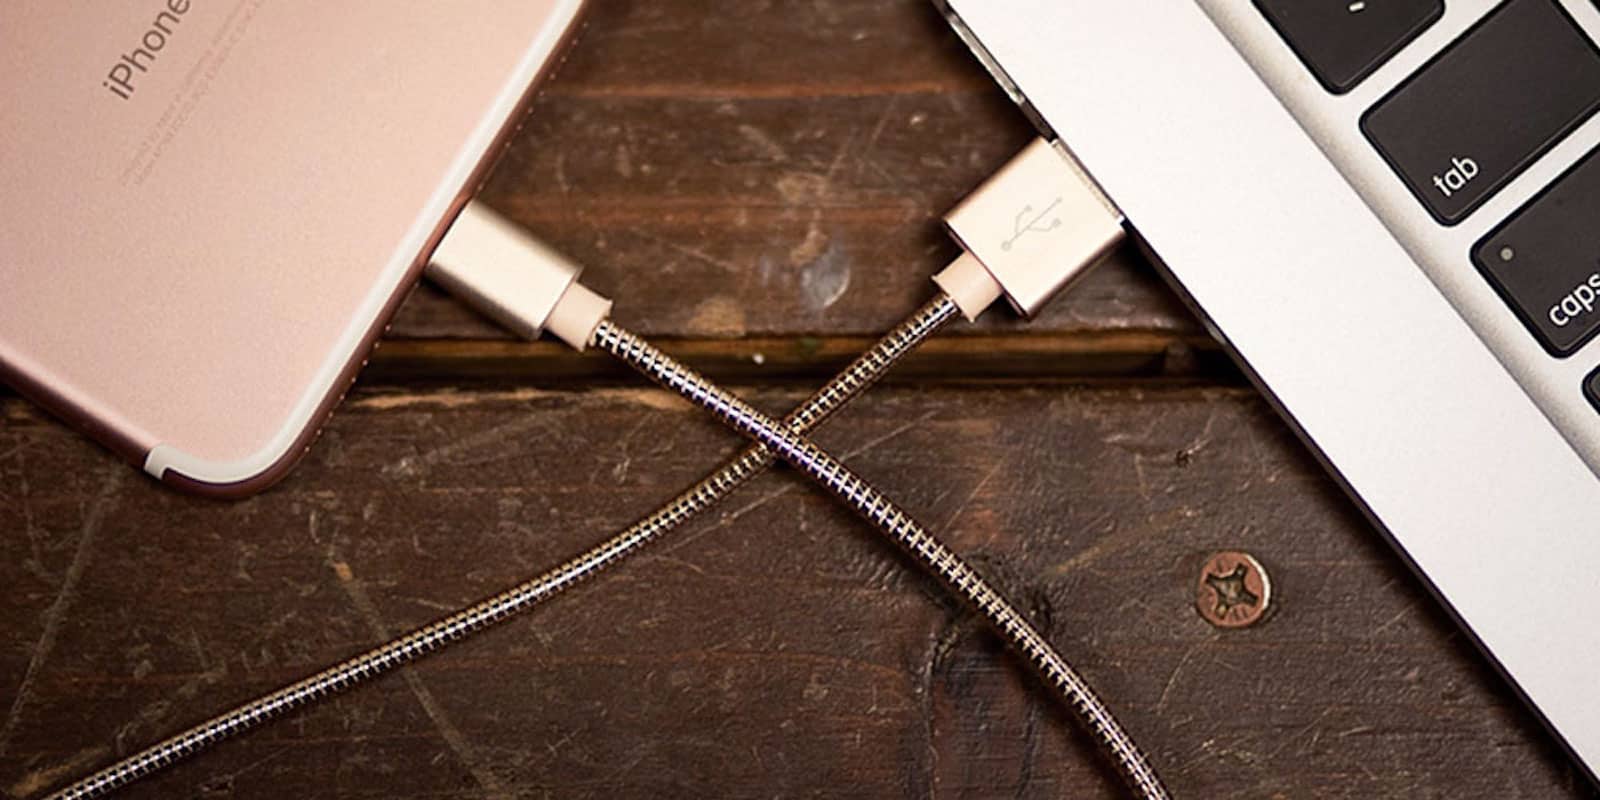 These MFi-certified Lightning cables are sheathed in steel and designed to last forever.